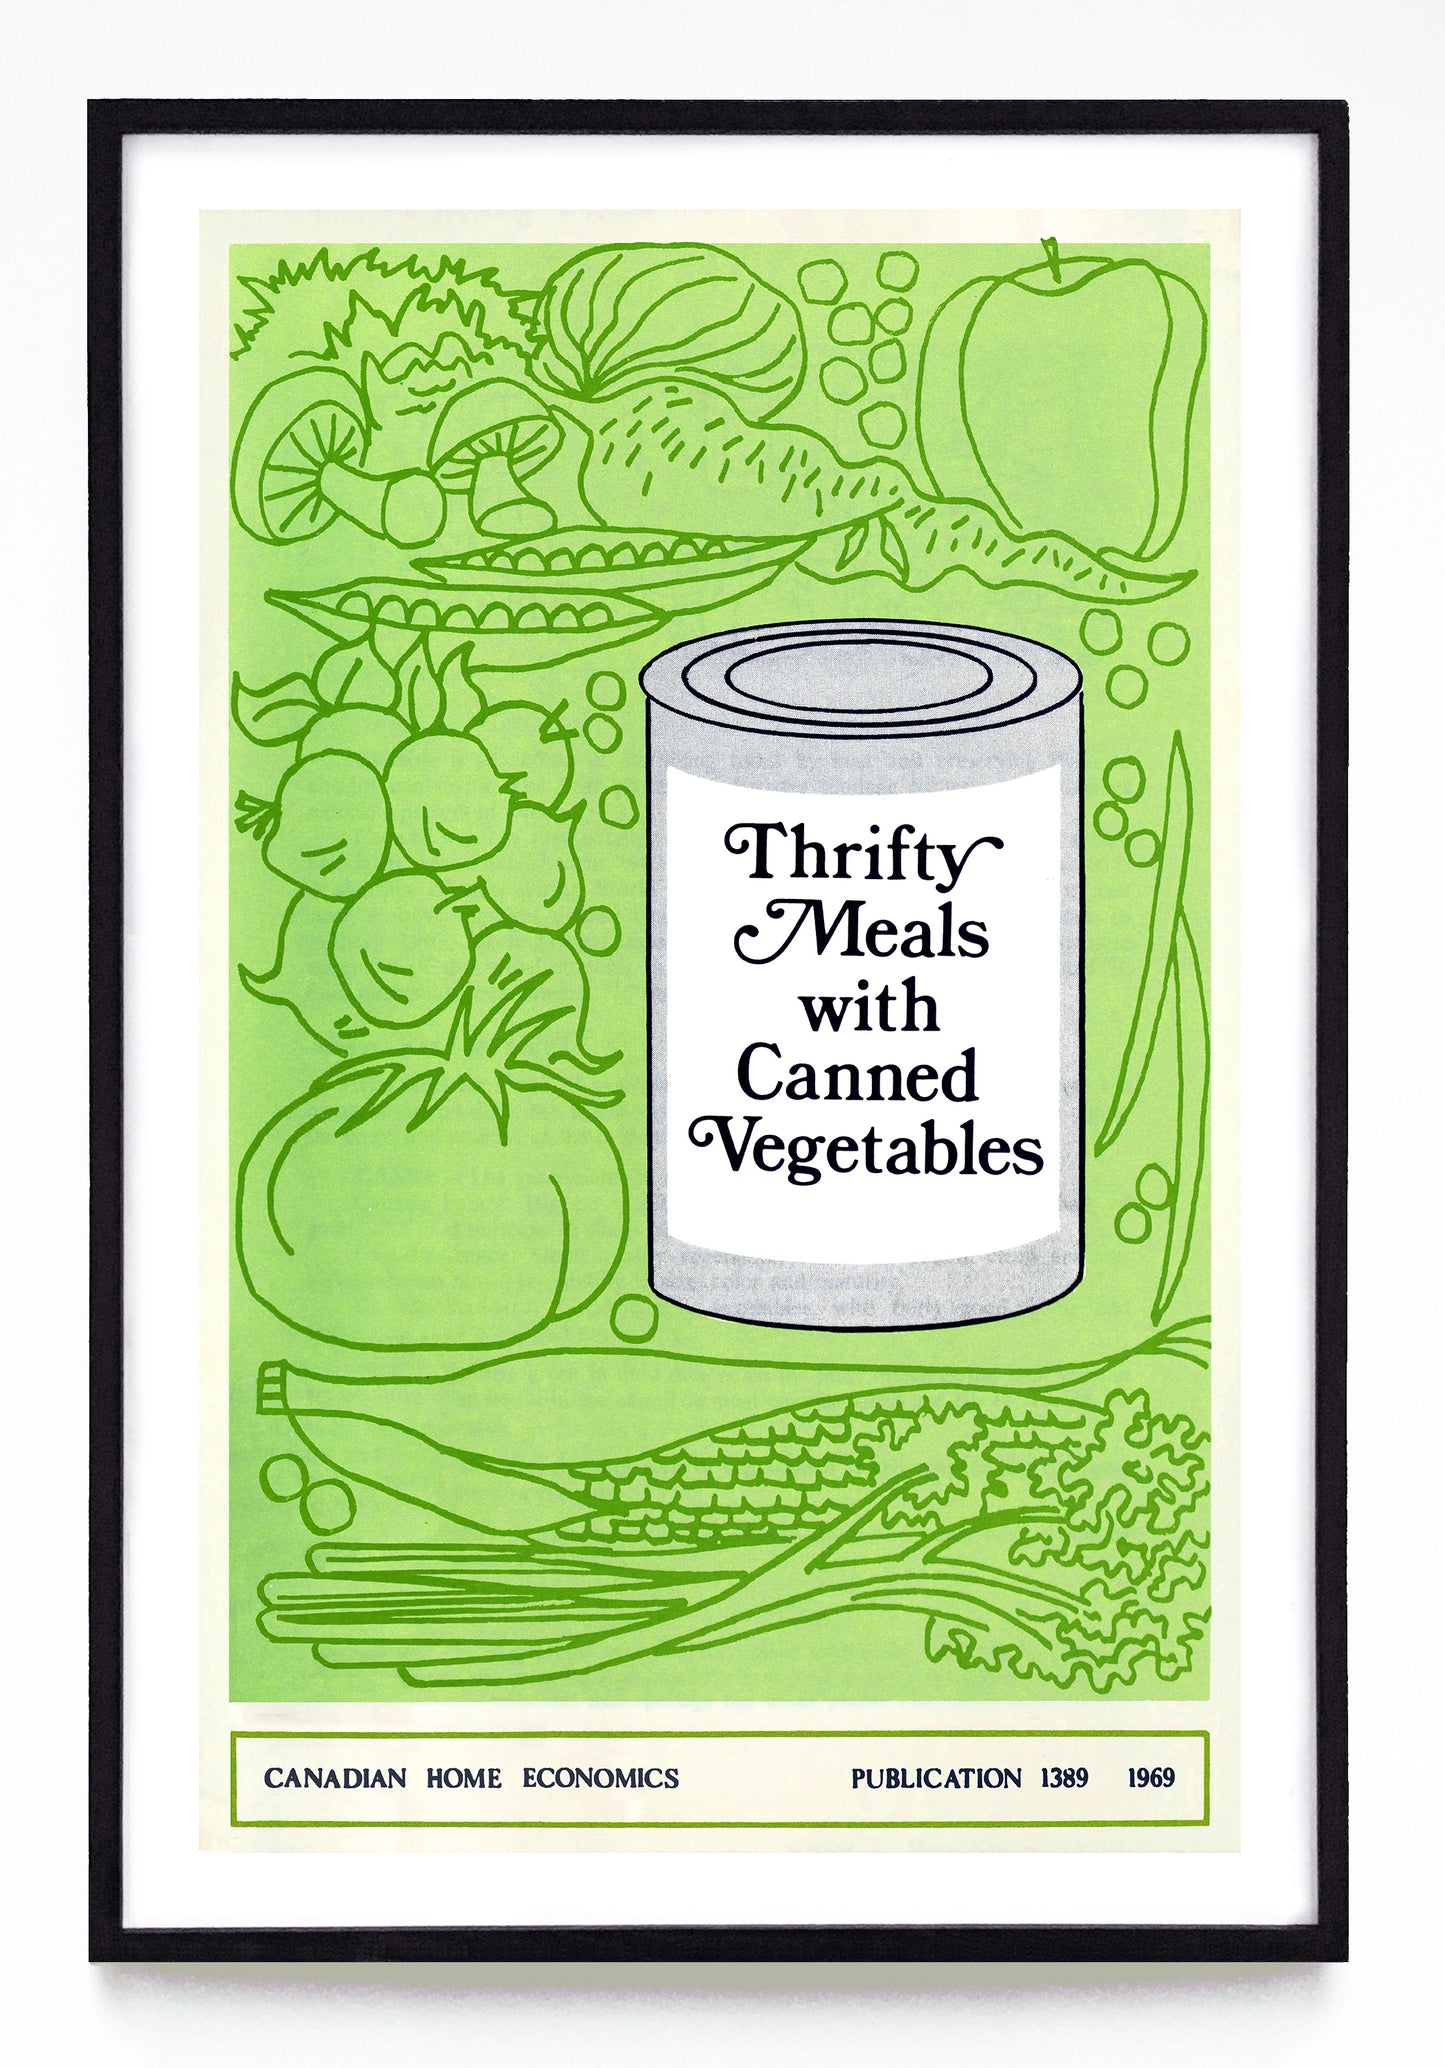 "Thrifty Meals with Canned Vegetables" print (1969)